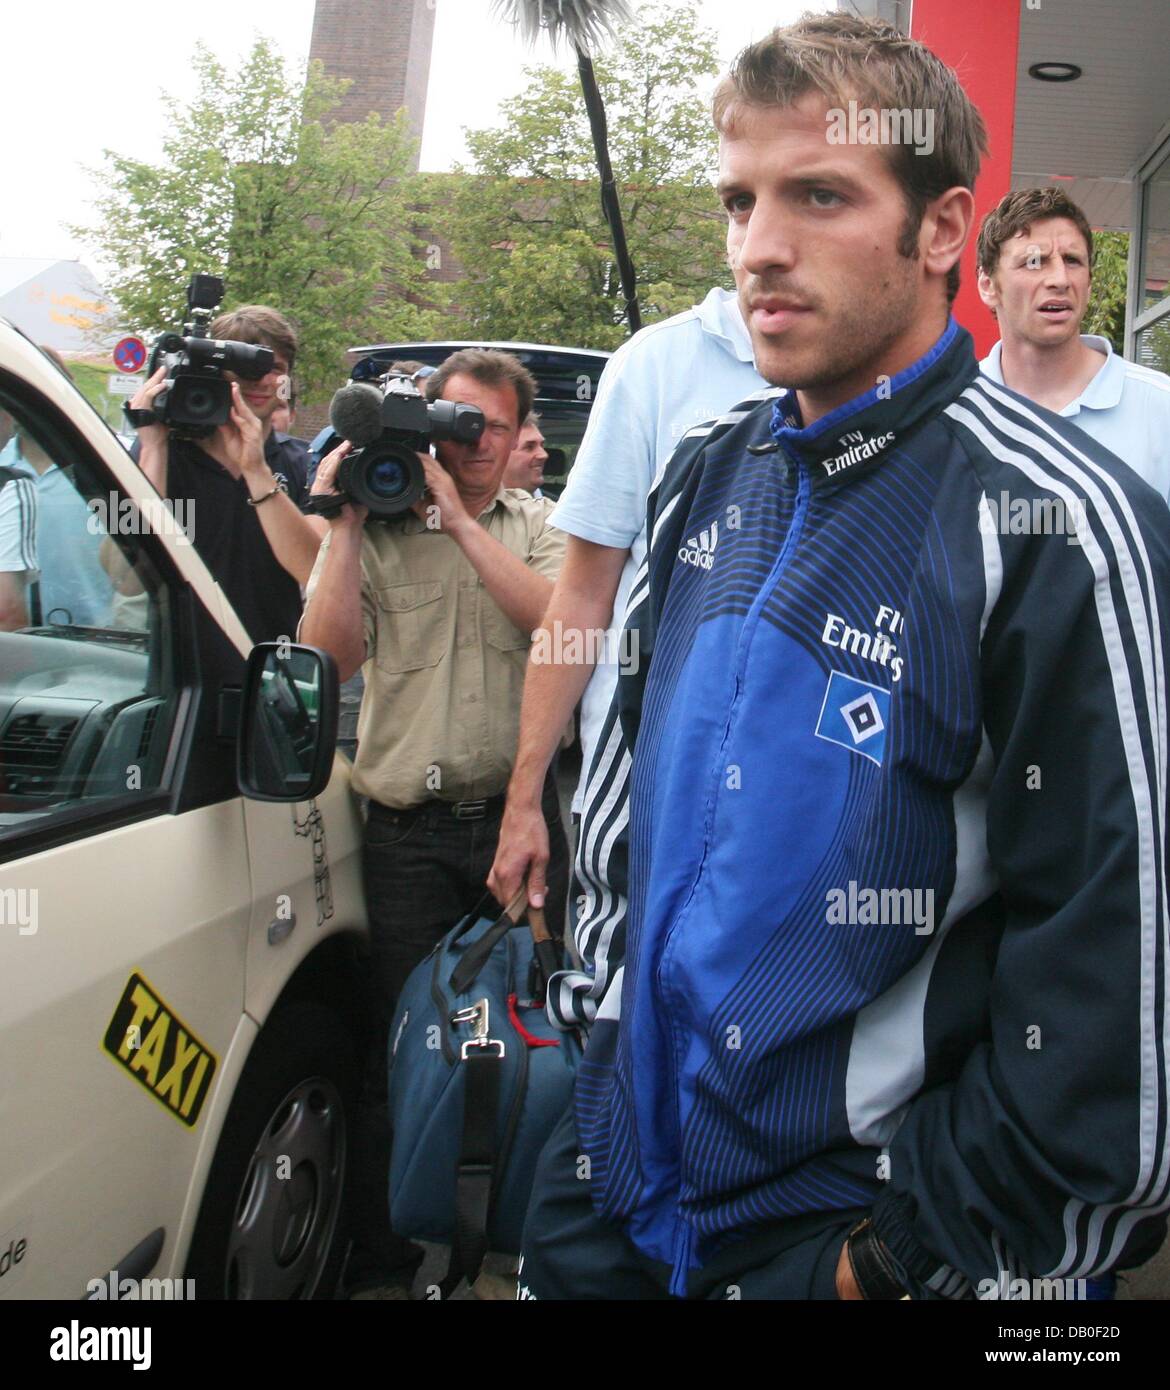 Hamburg's Dutch player Rafael van der Vaart (R) arrives at the airport in Hamburg, Germany, 17 August 2007. Hamburg's second round UEFA cup match against Honved Budapest ended in a 0-0 tie on 16 August 2007. Van der Vaart spent the match on the subs bank. Up-to-date it remains unclear if he will be playing against Bayer Leverkusen on 19 August 2007.  Photo: Tim Thaler Stock Photo